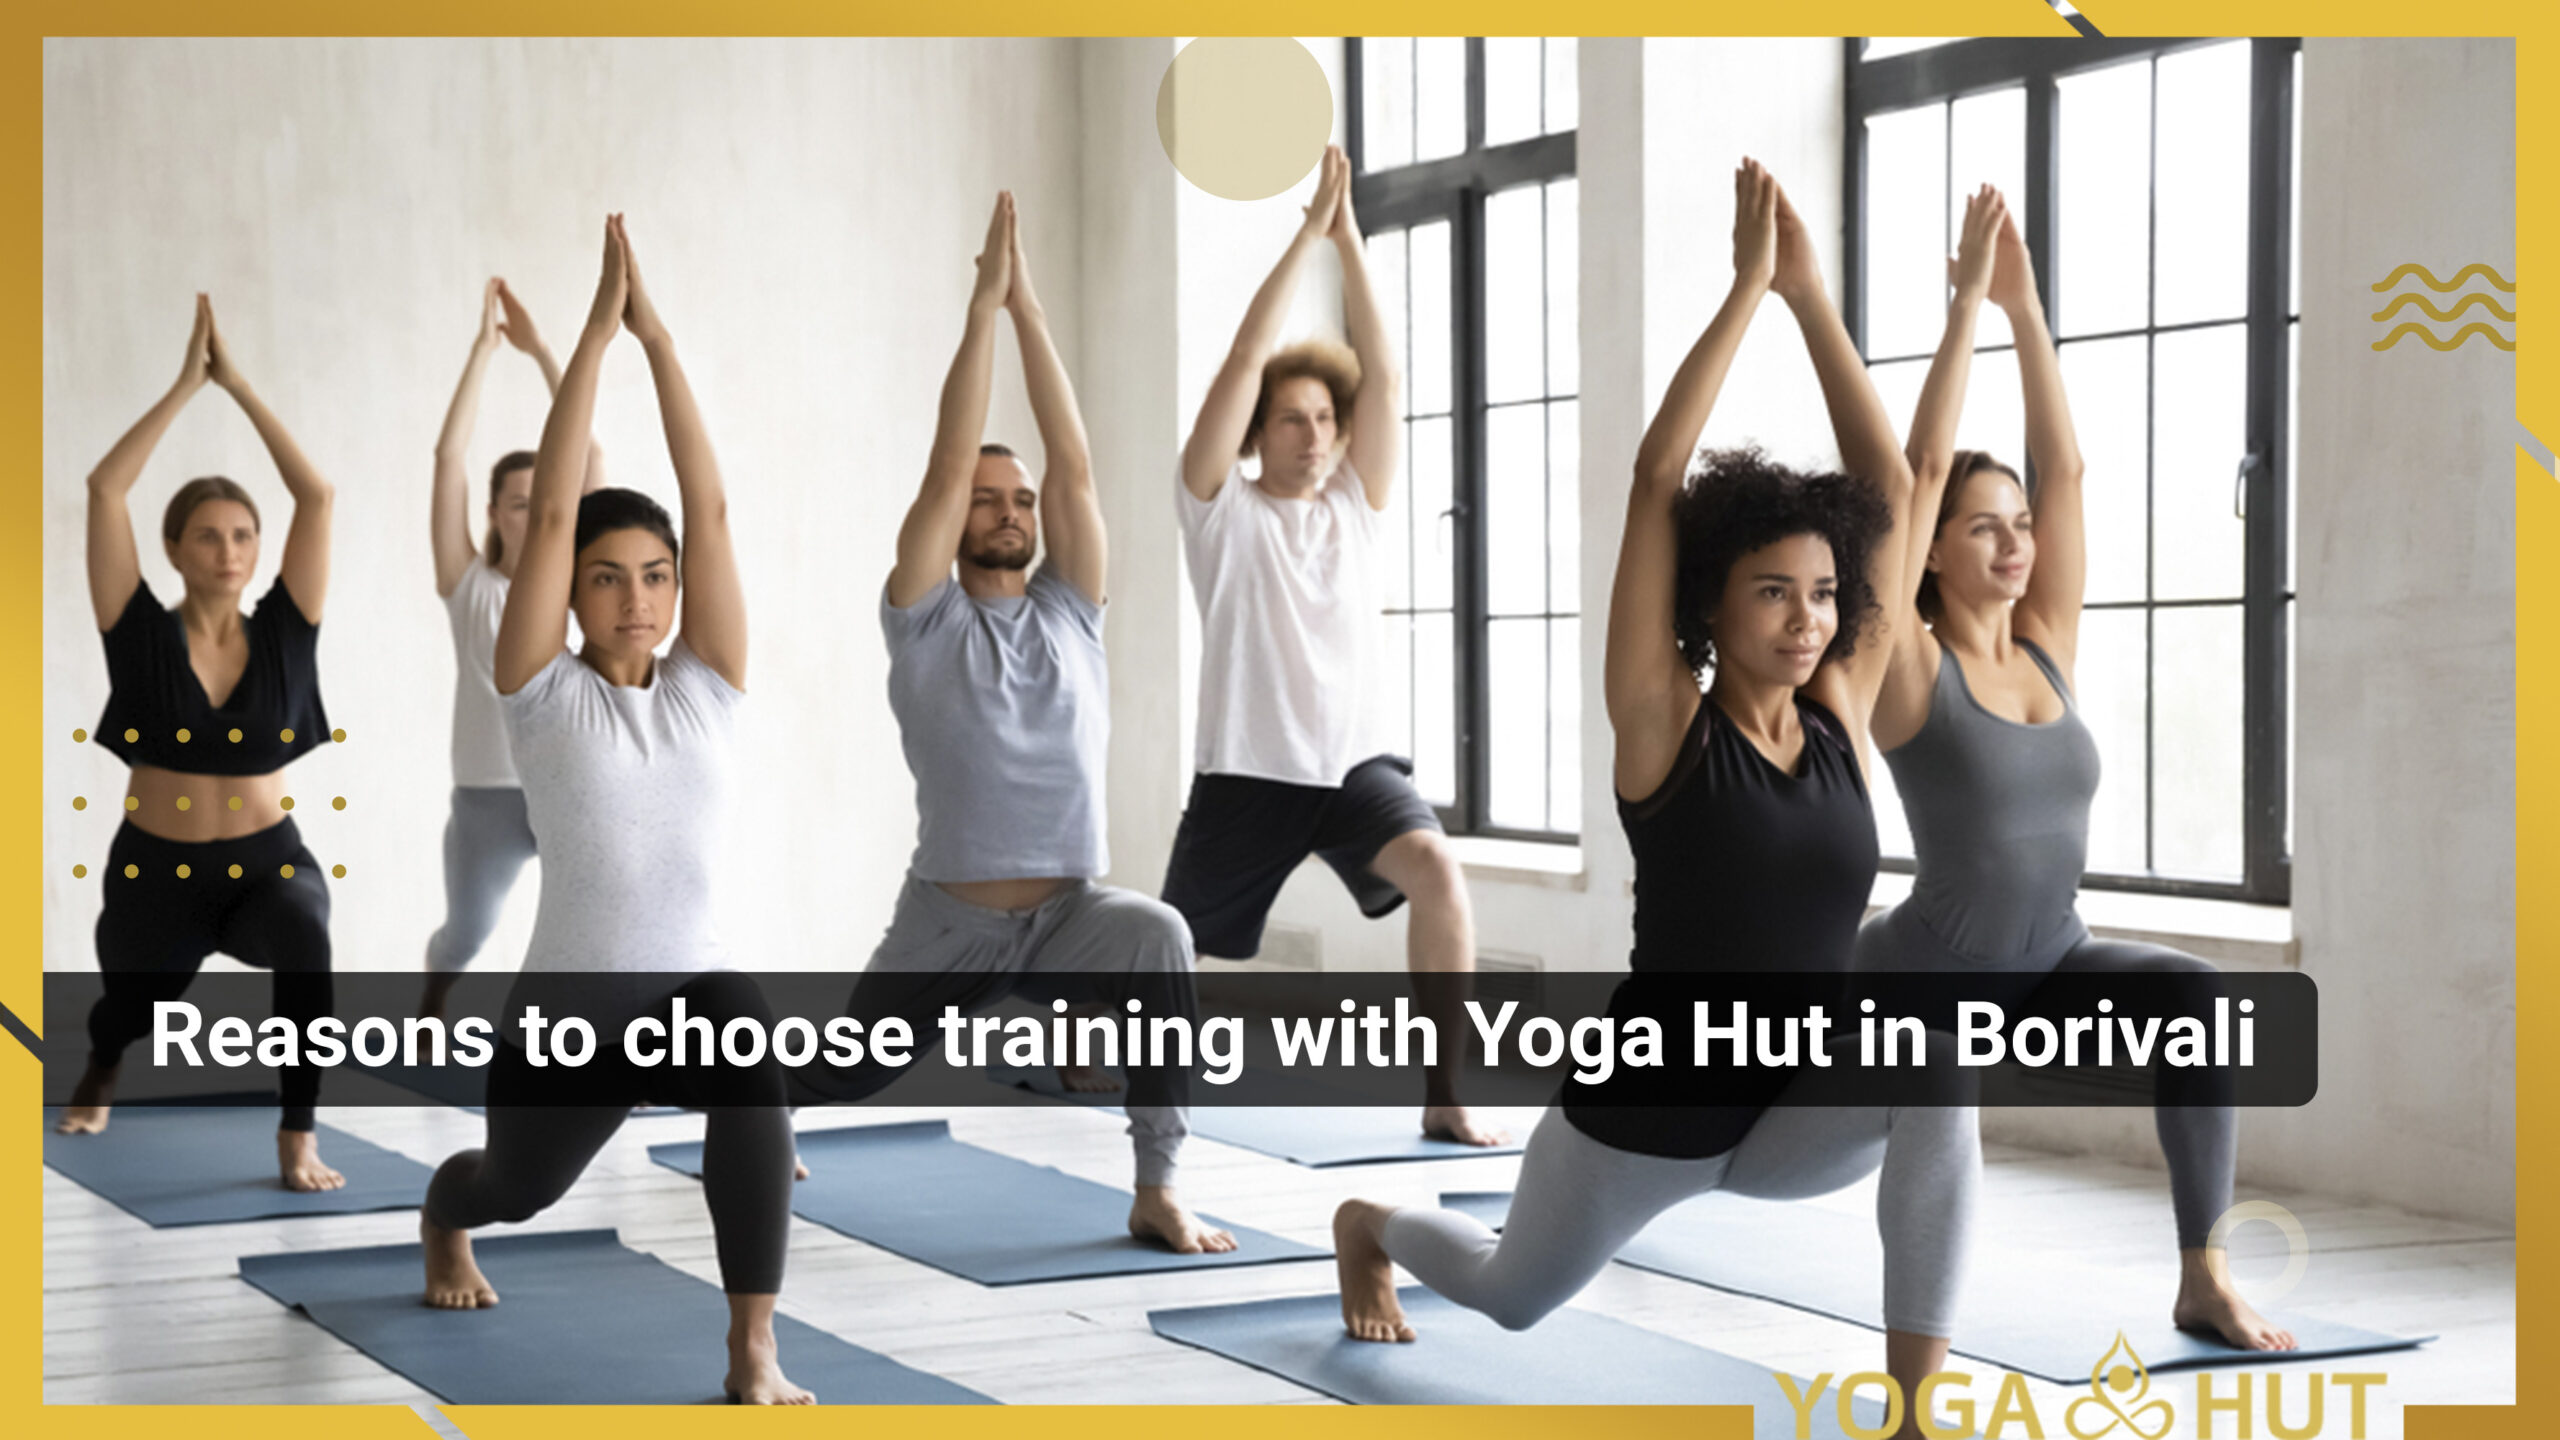 Reasons to choose training with Yoga Hut in Borivali